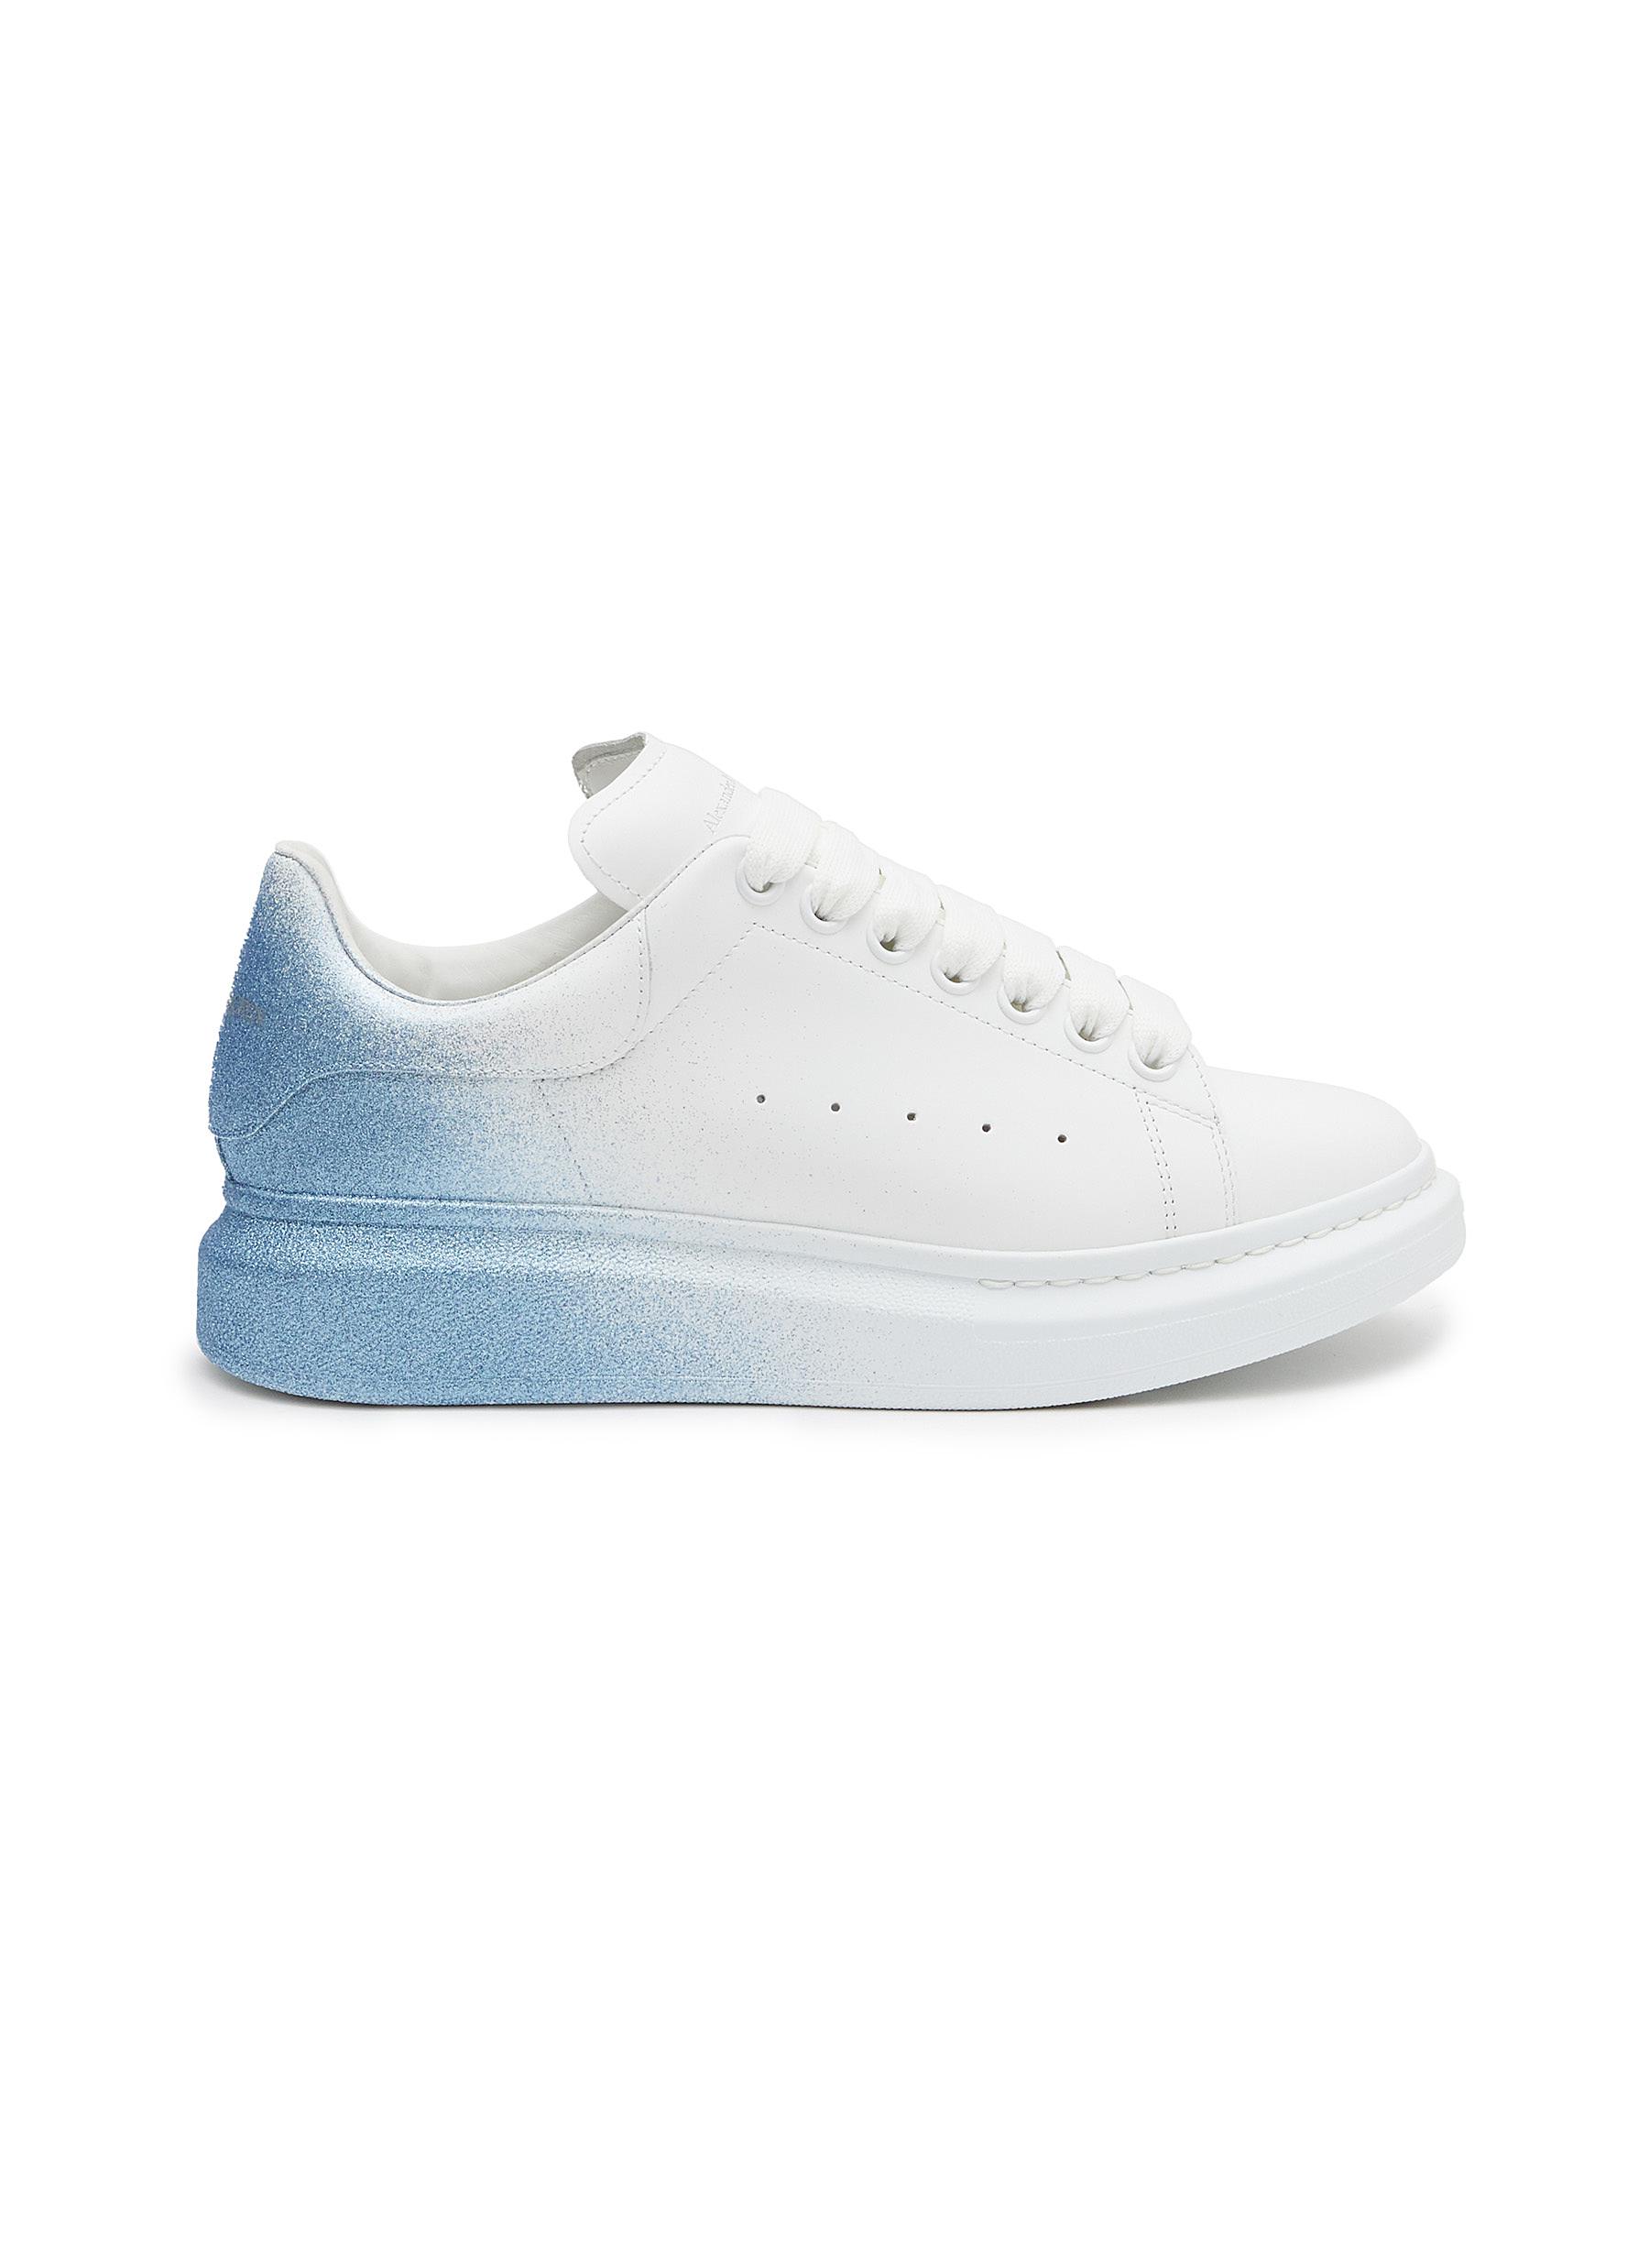 Oversized Sneakers' in Leather with Airbrushed Glitter Heel